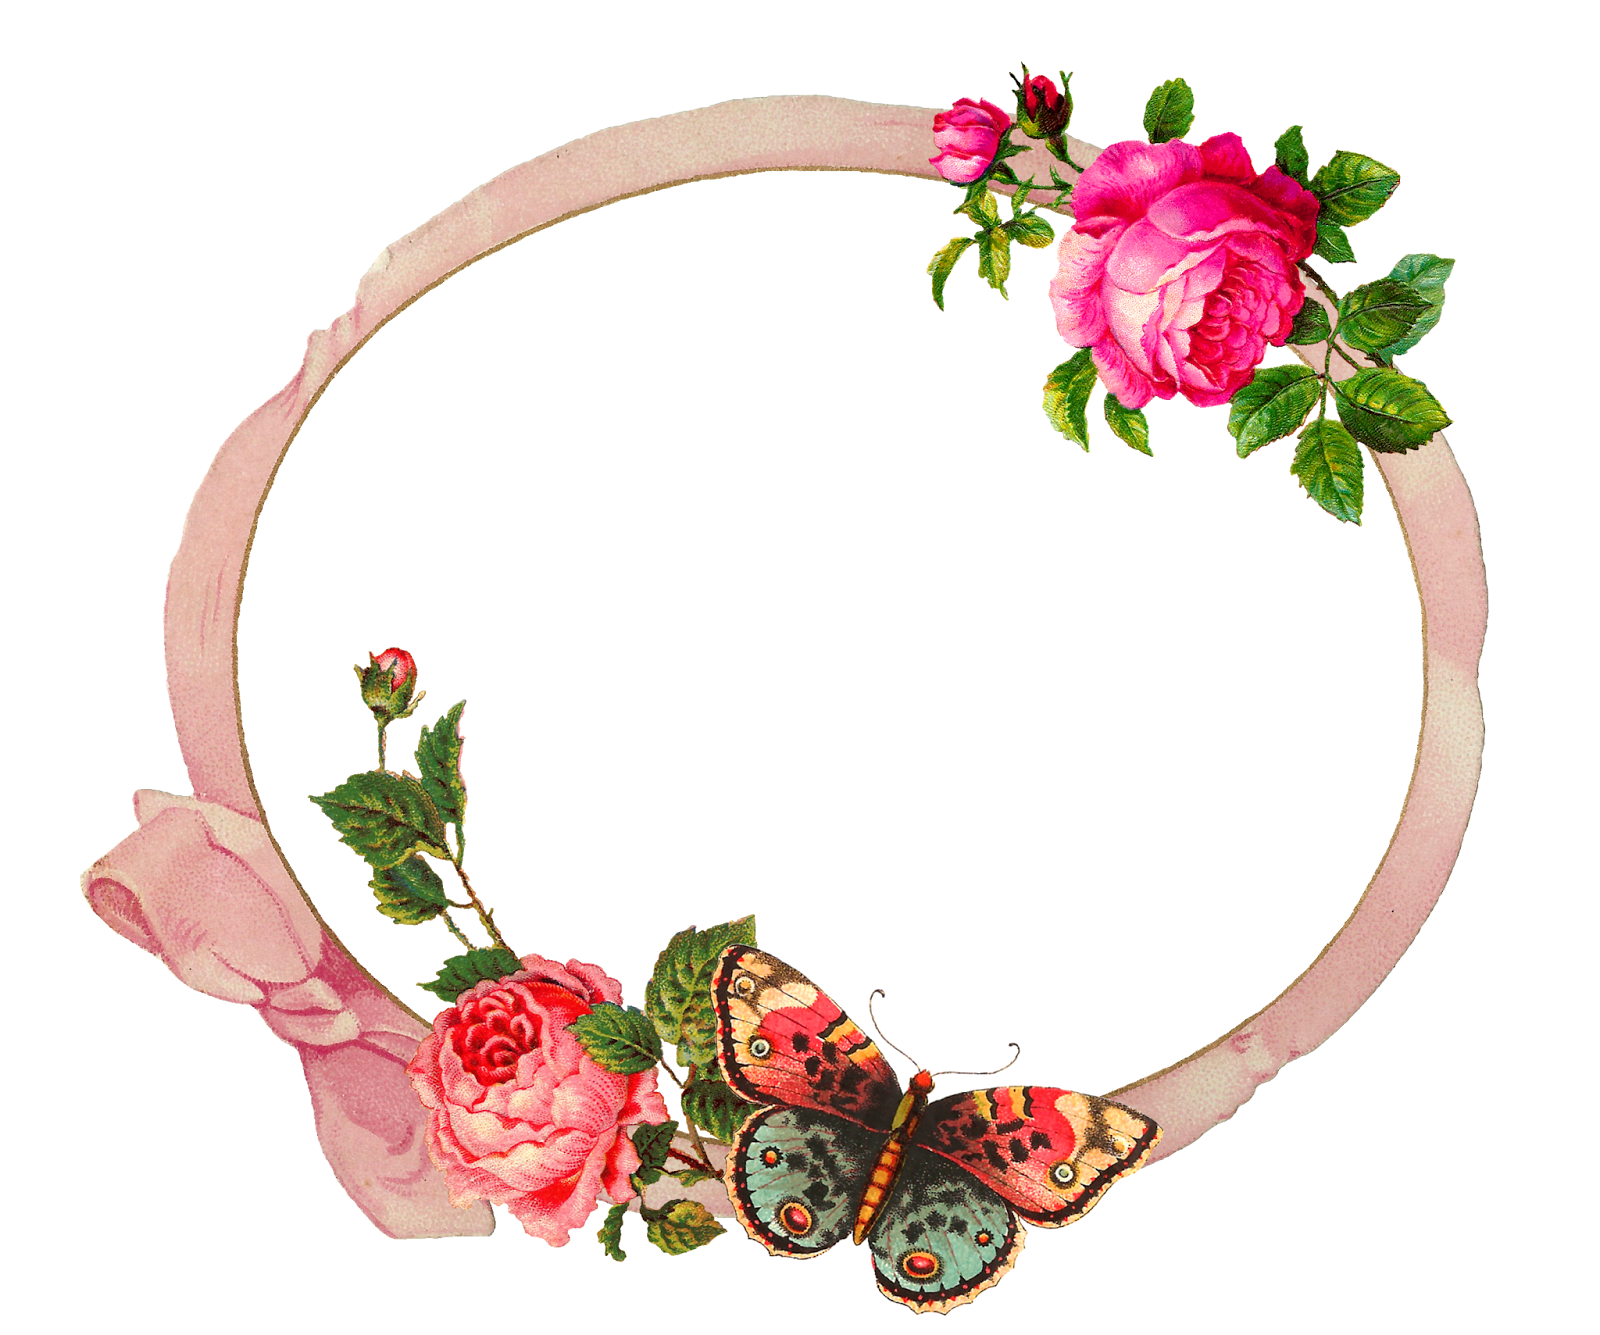 Border Illustration And Decorated It With Roses - Garden Roses (1600x1335)